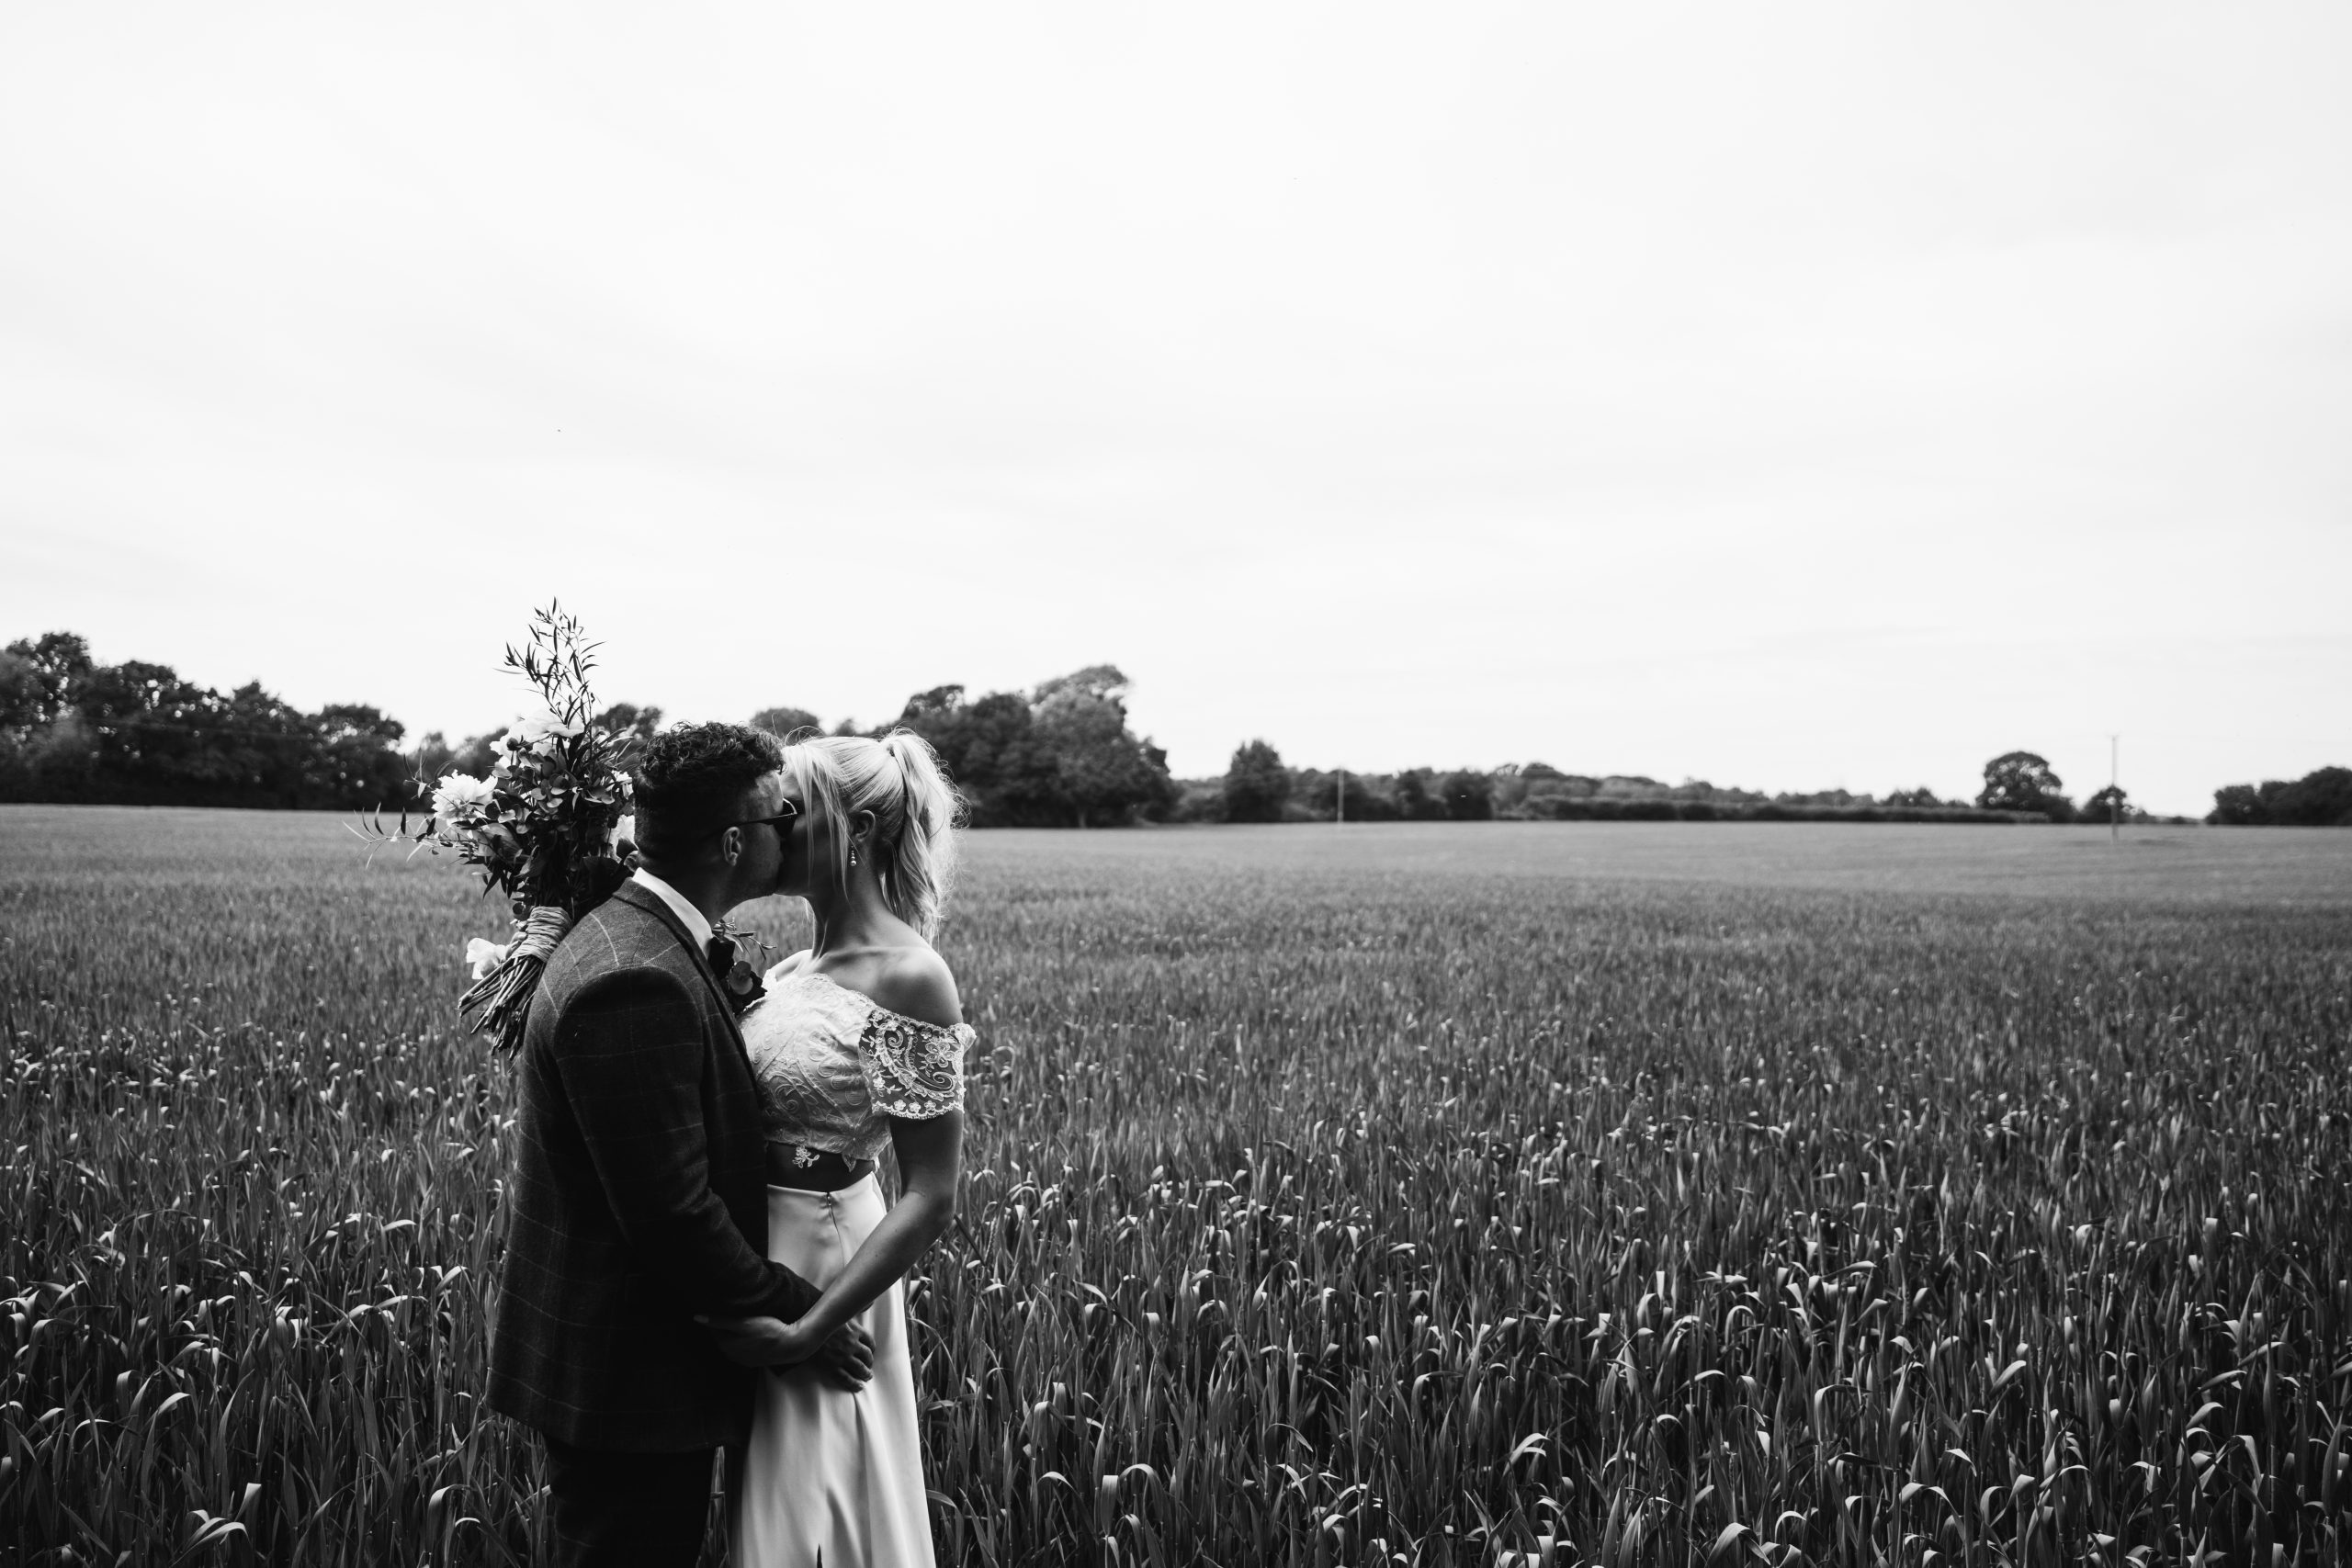 Beautiful outdoor photo of bride and groom